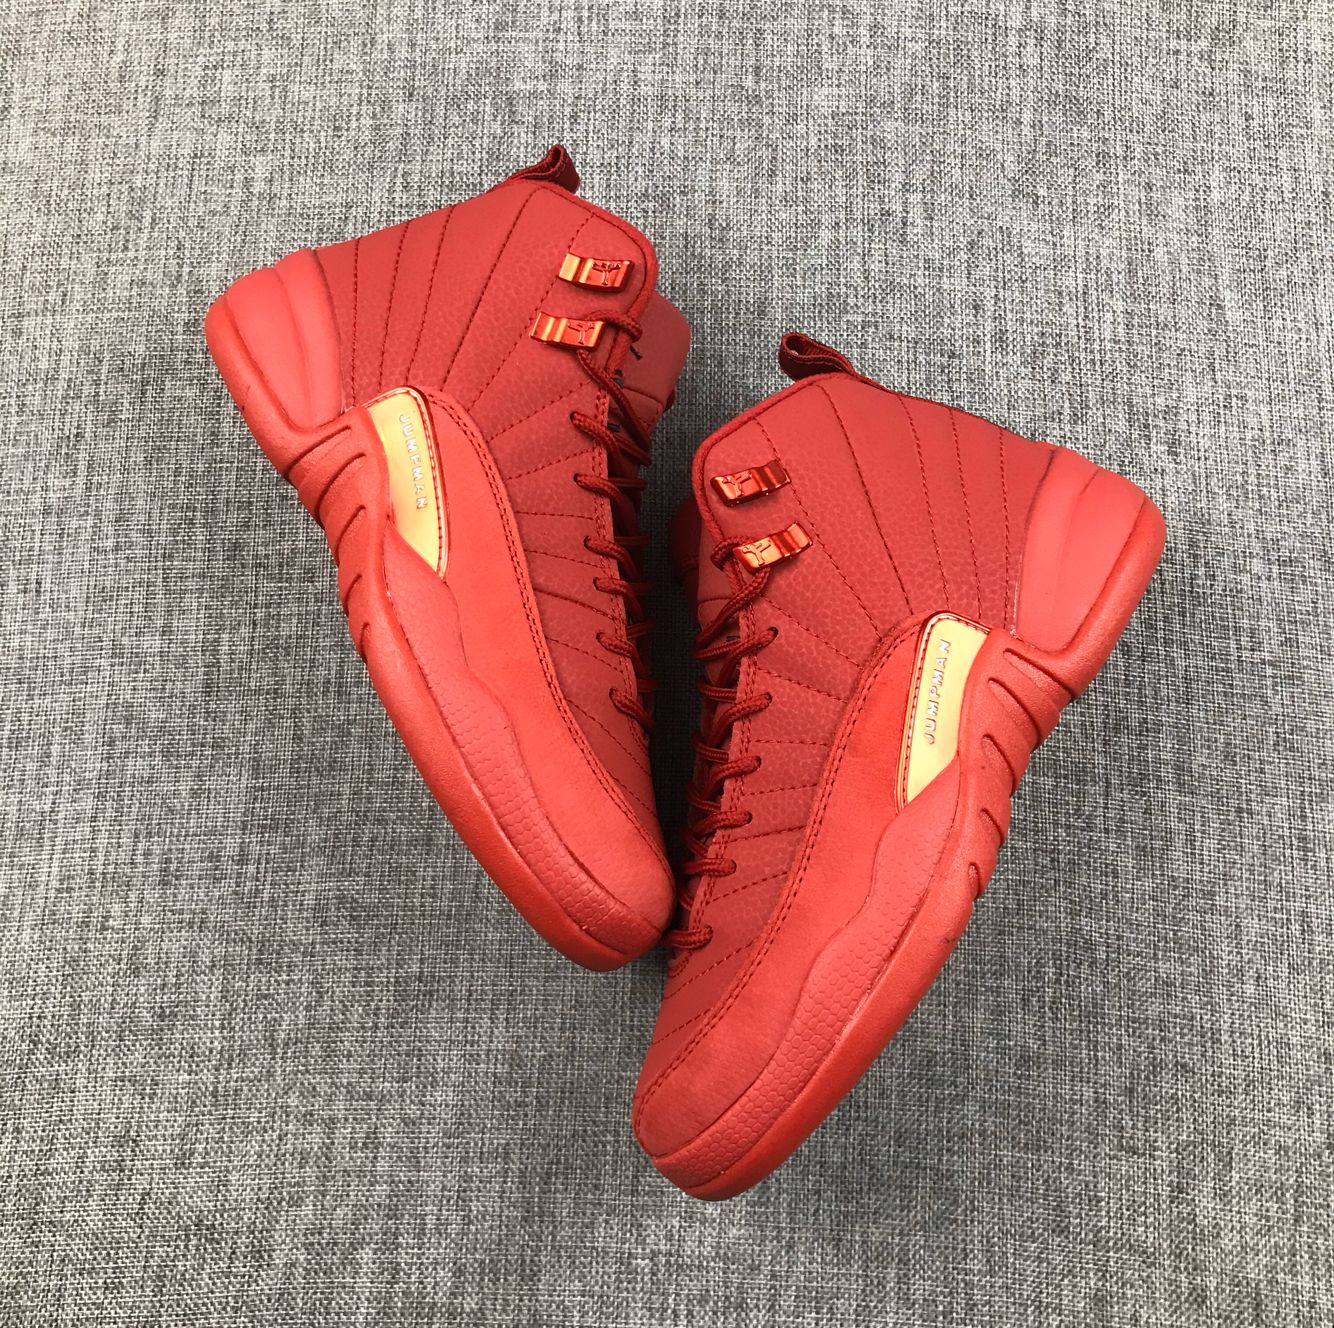 New Air Jordan 12 High All Red Shoes - Click Image to Close